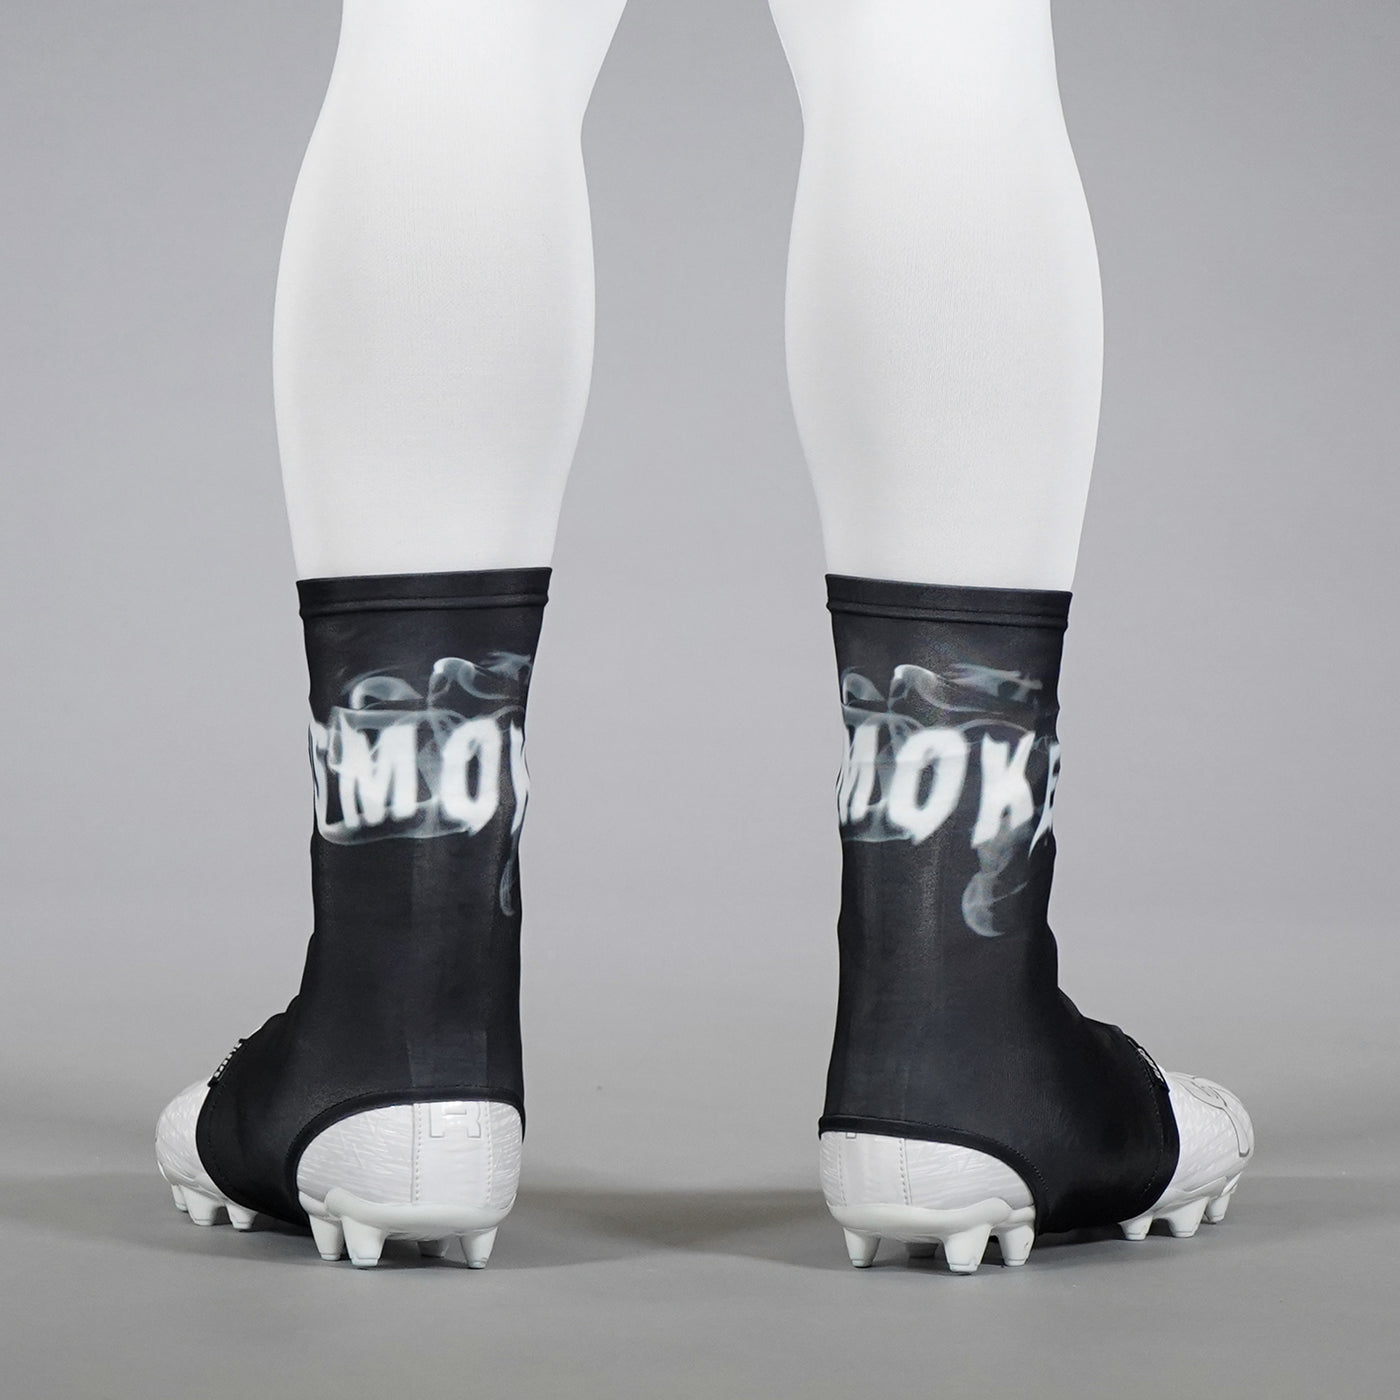 Smoke Spats / Cleat Covers